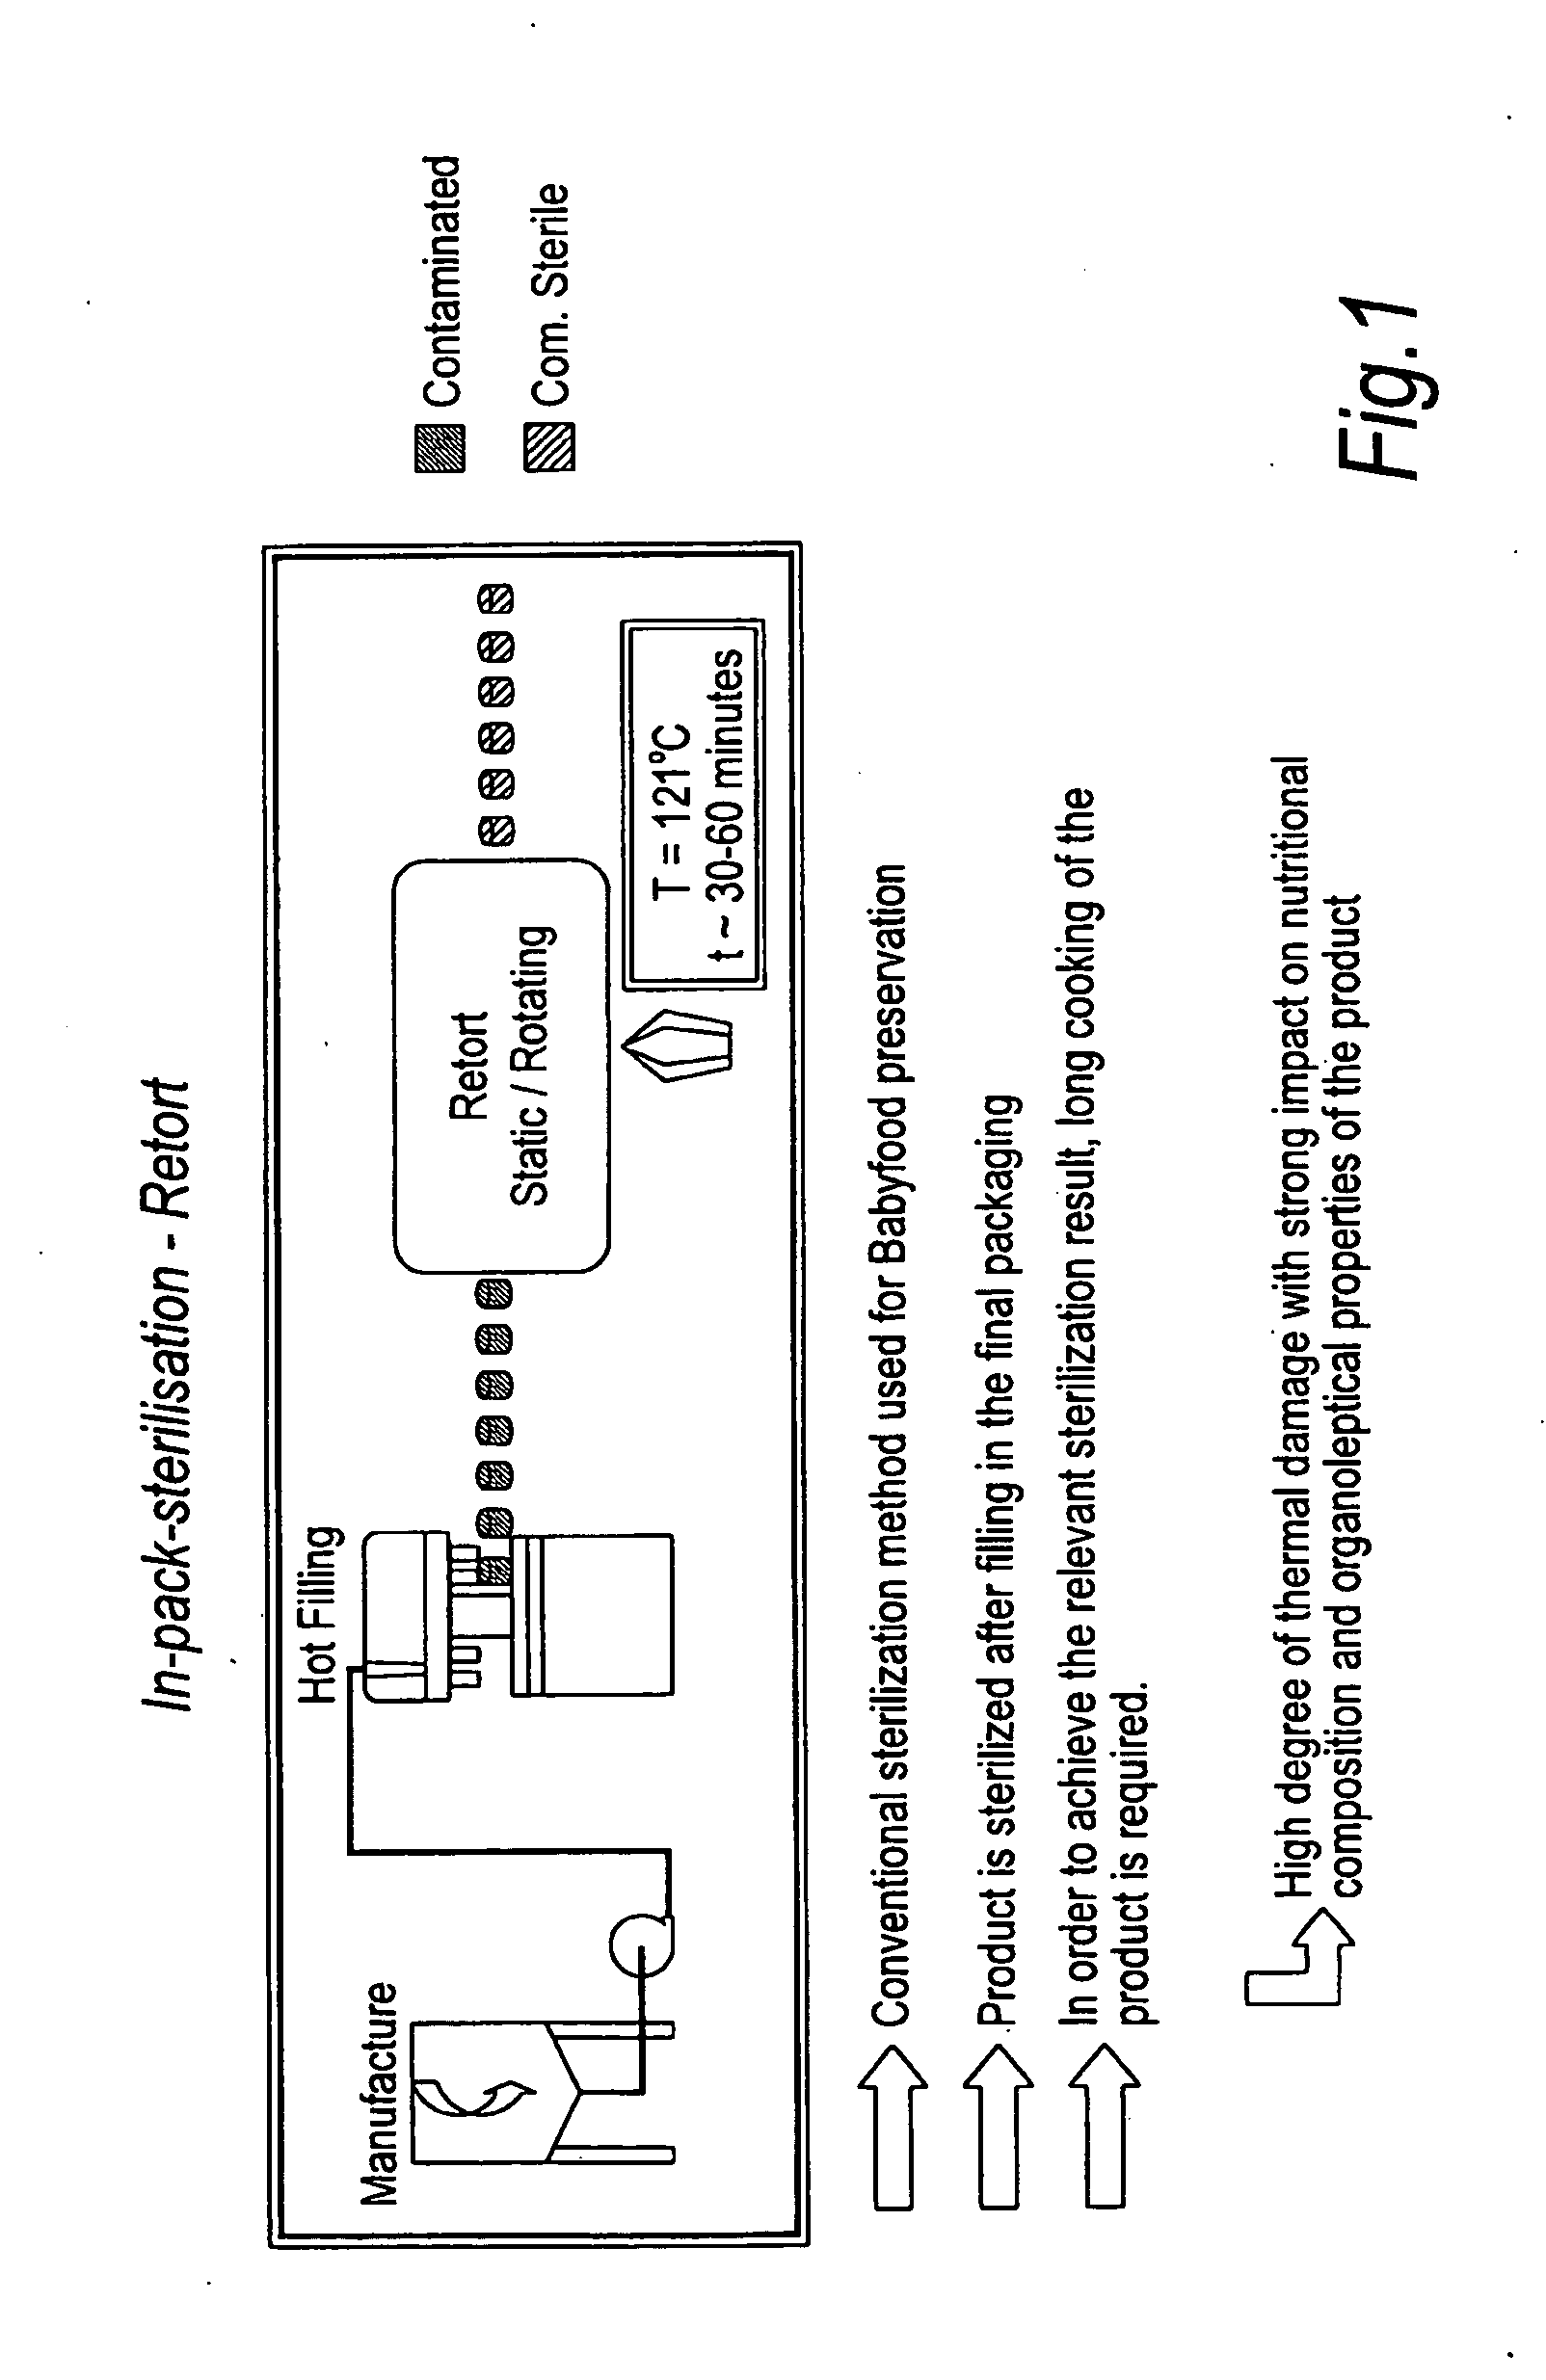 Process for producing infant food products